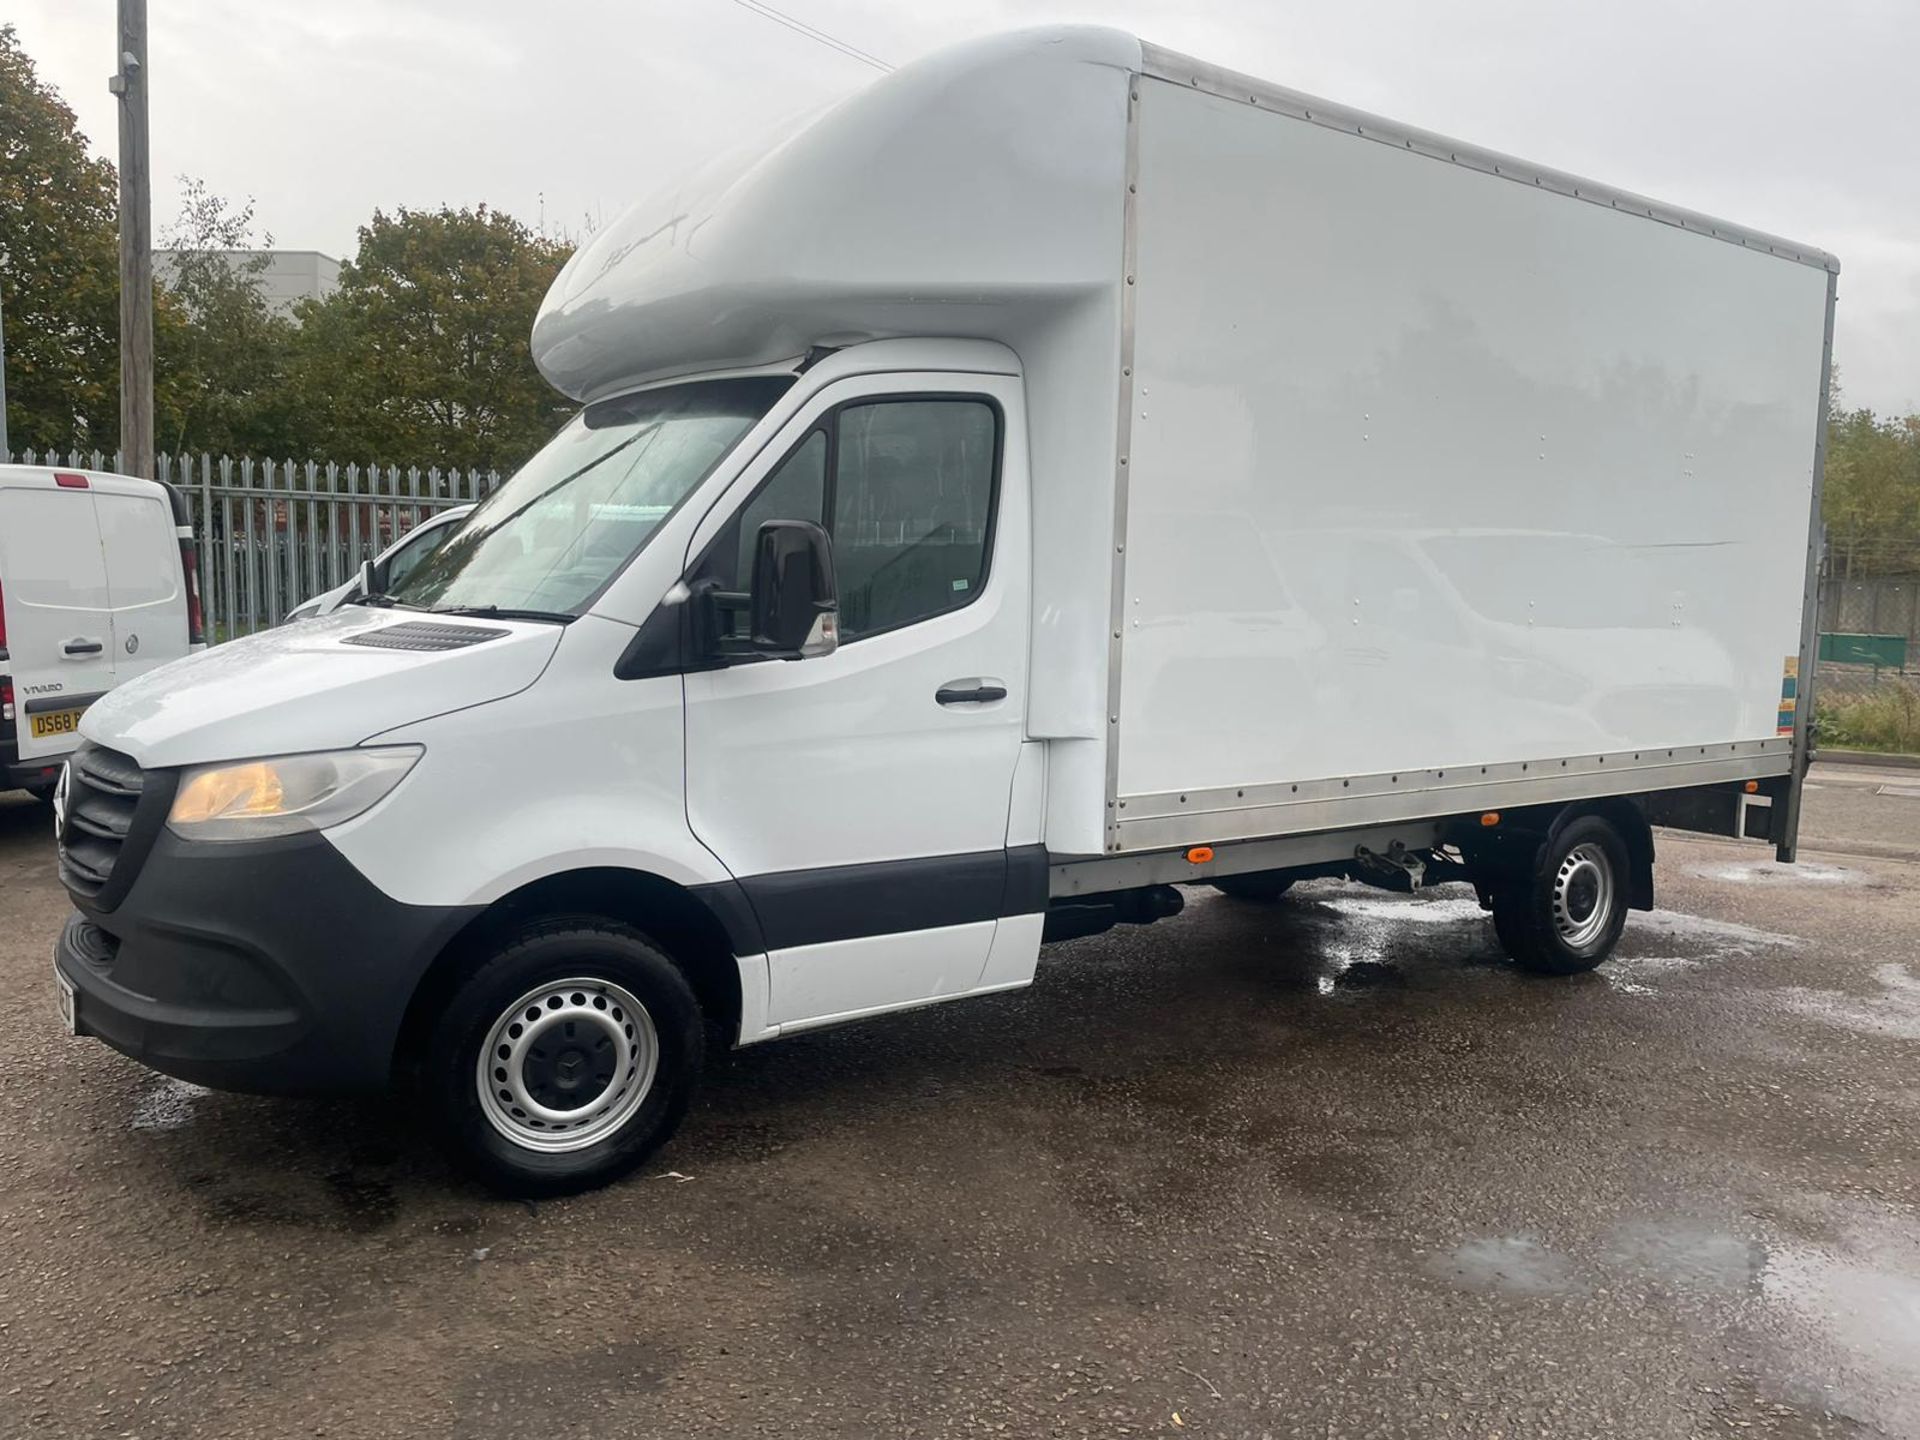 2018 MERCEDES SPRINTER 314 CDTI LUTON WITH TAIL LIFT - 108,356 WARRANTED MILES - 2.2 EURO 6 ENGINE  - Image 9 of 10